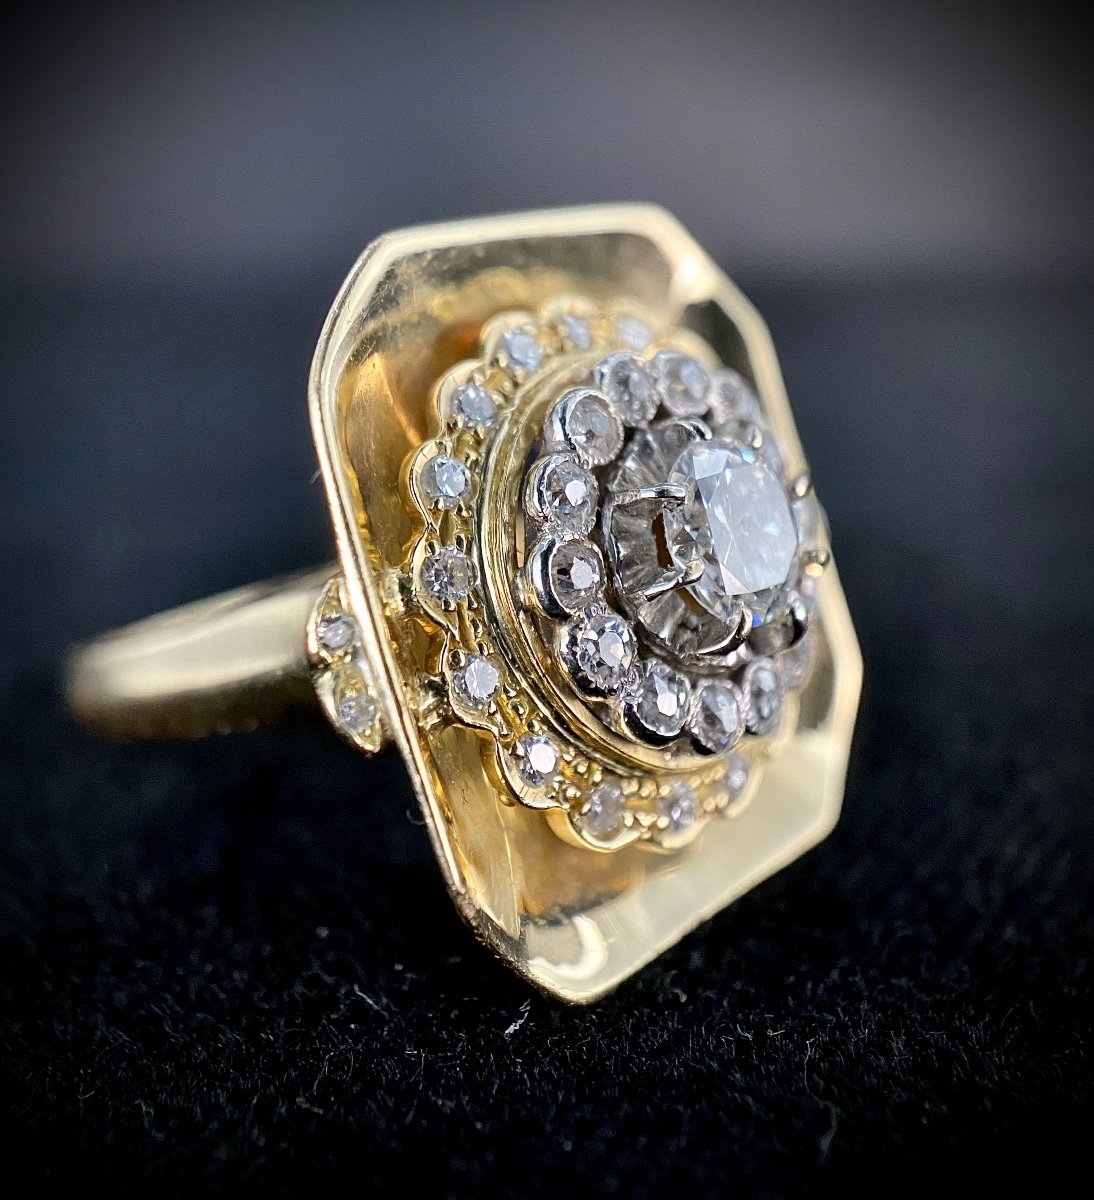 Ring In Yellow And White Gold Set With 1 Diamond Of 0.60 Carats And Double Surround Of 1.20 Carats